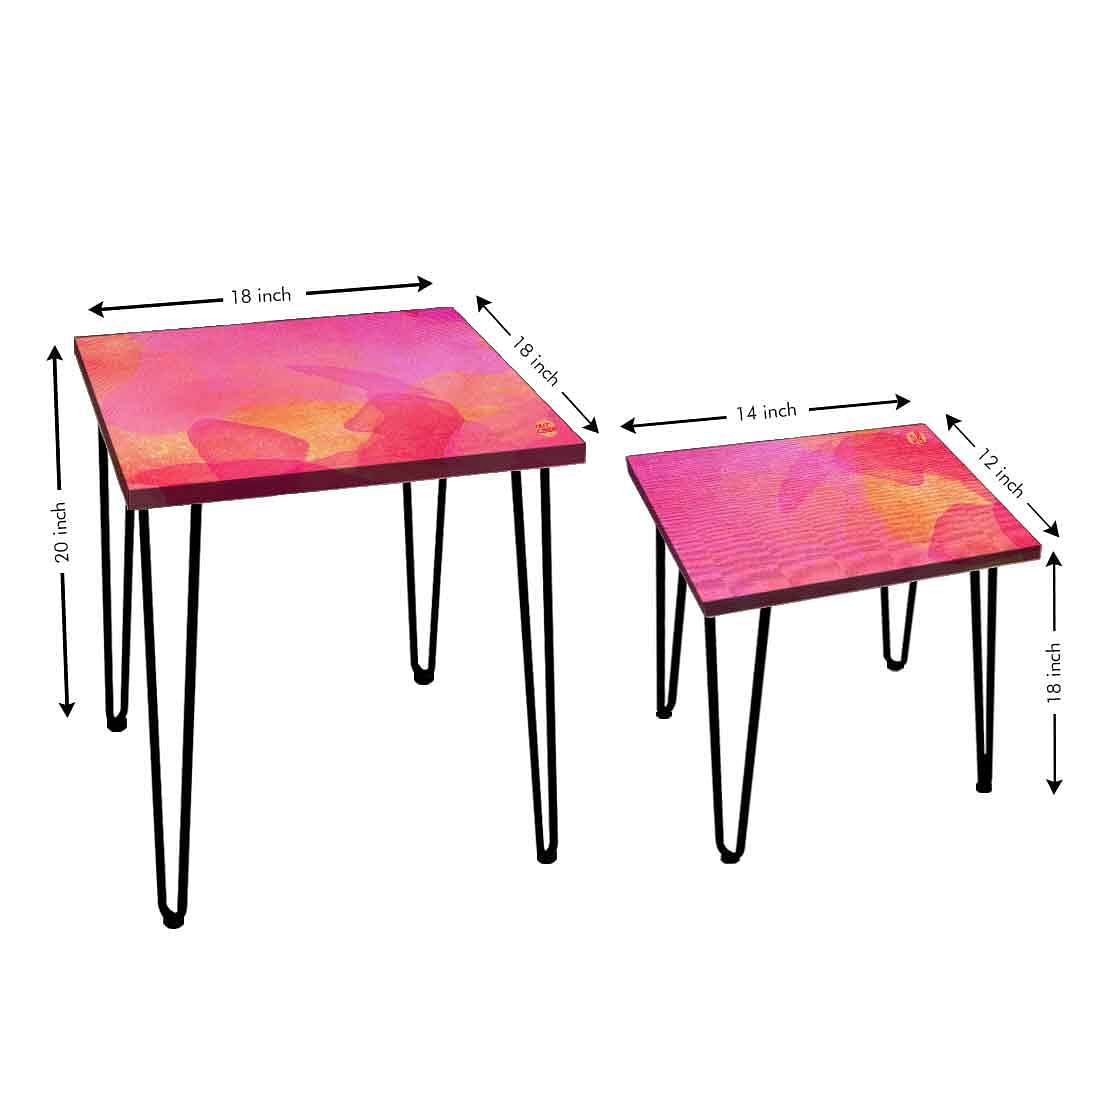 Nesting End Tables Modern Decor for Home and Office Set of 2 - Pink Watercolor Nutcase